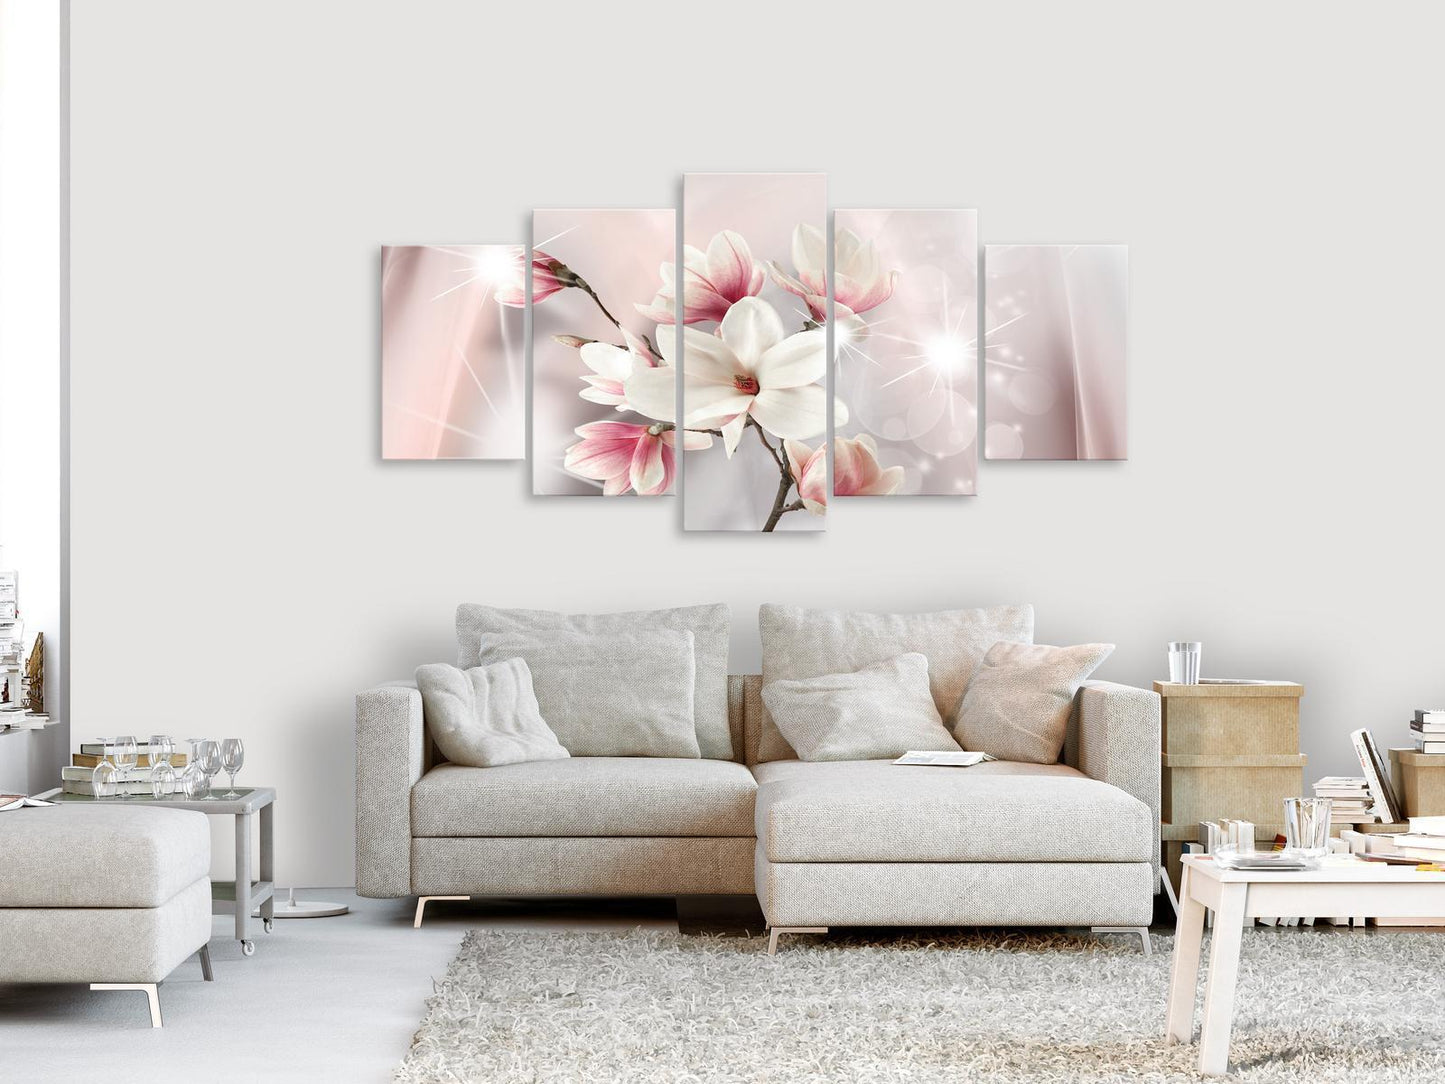 Painting - Dazzling Magnolias (5 Parts) Wide